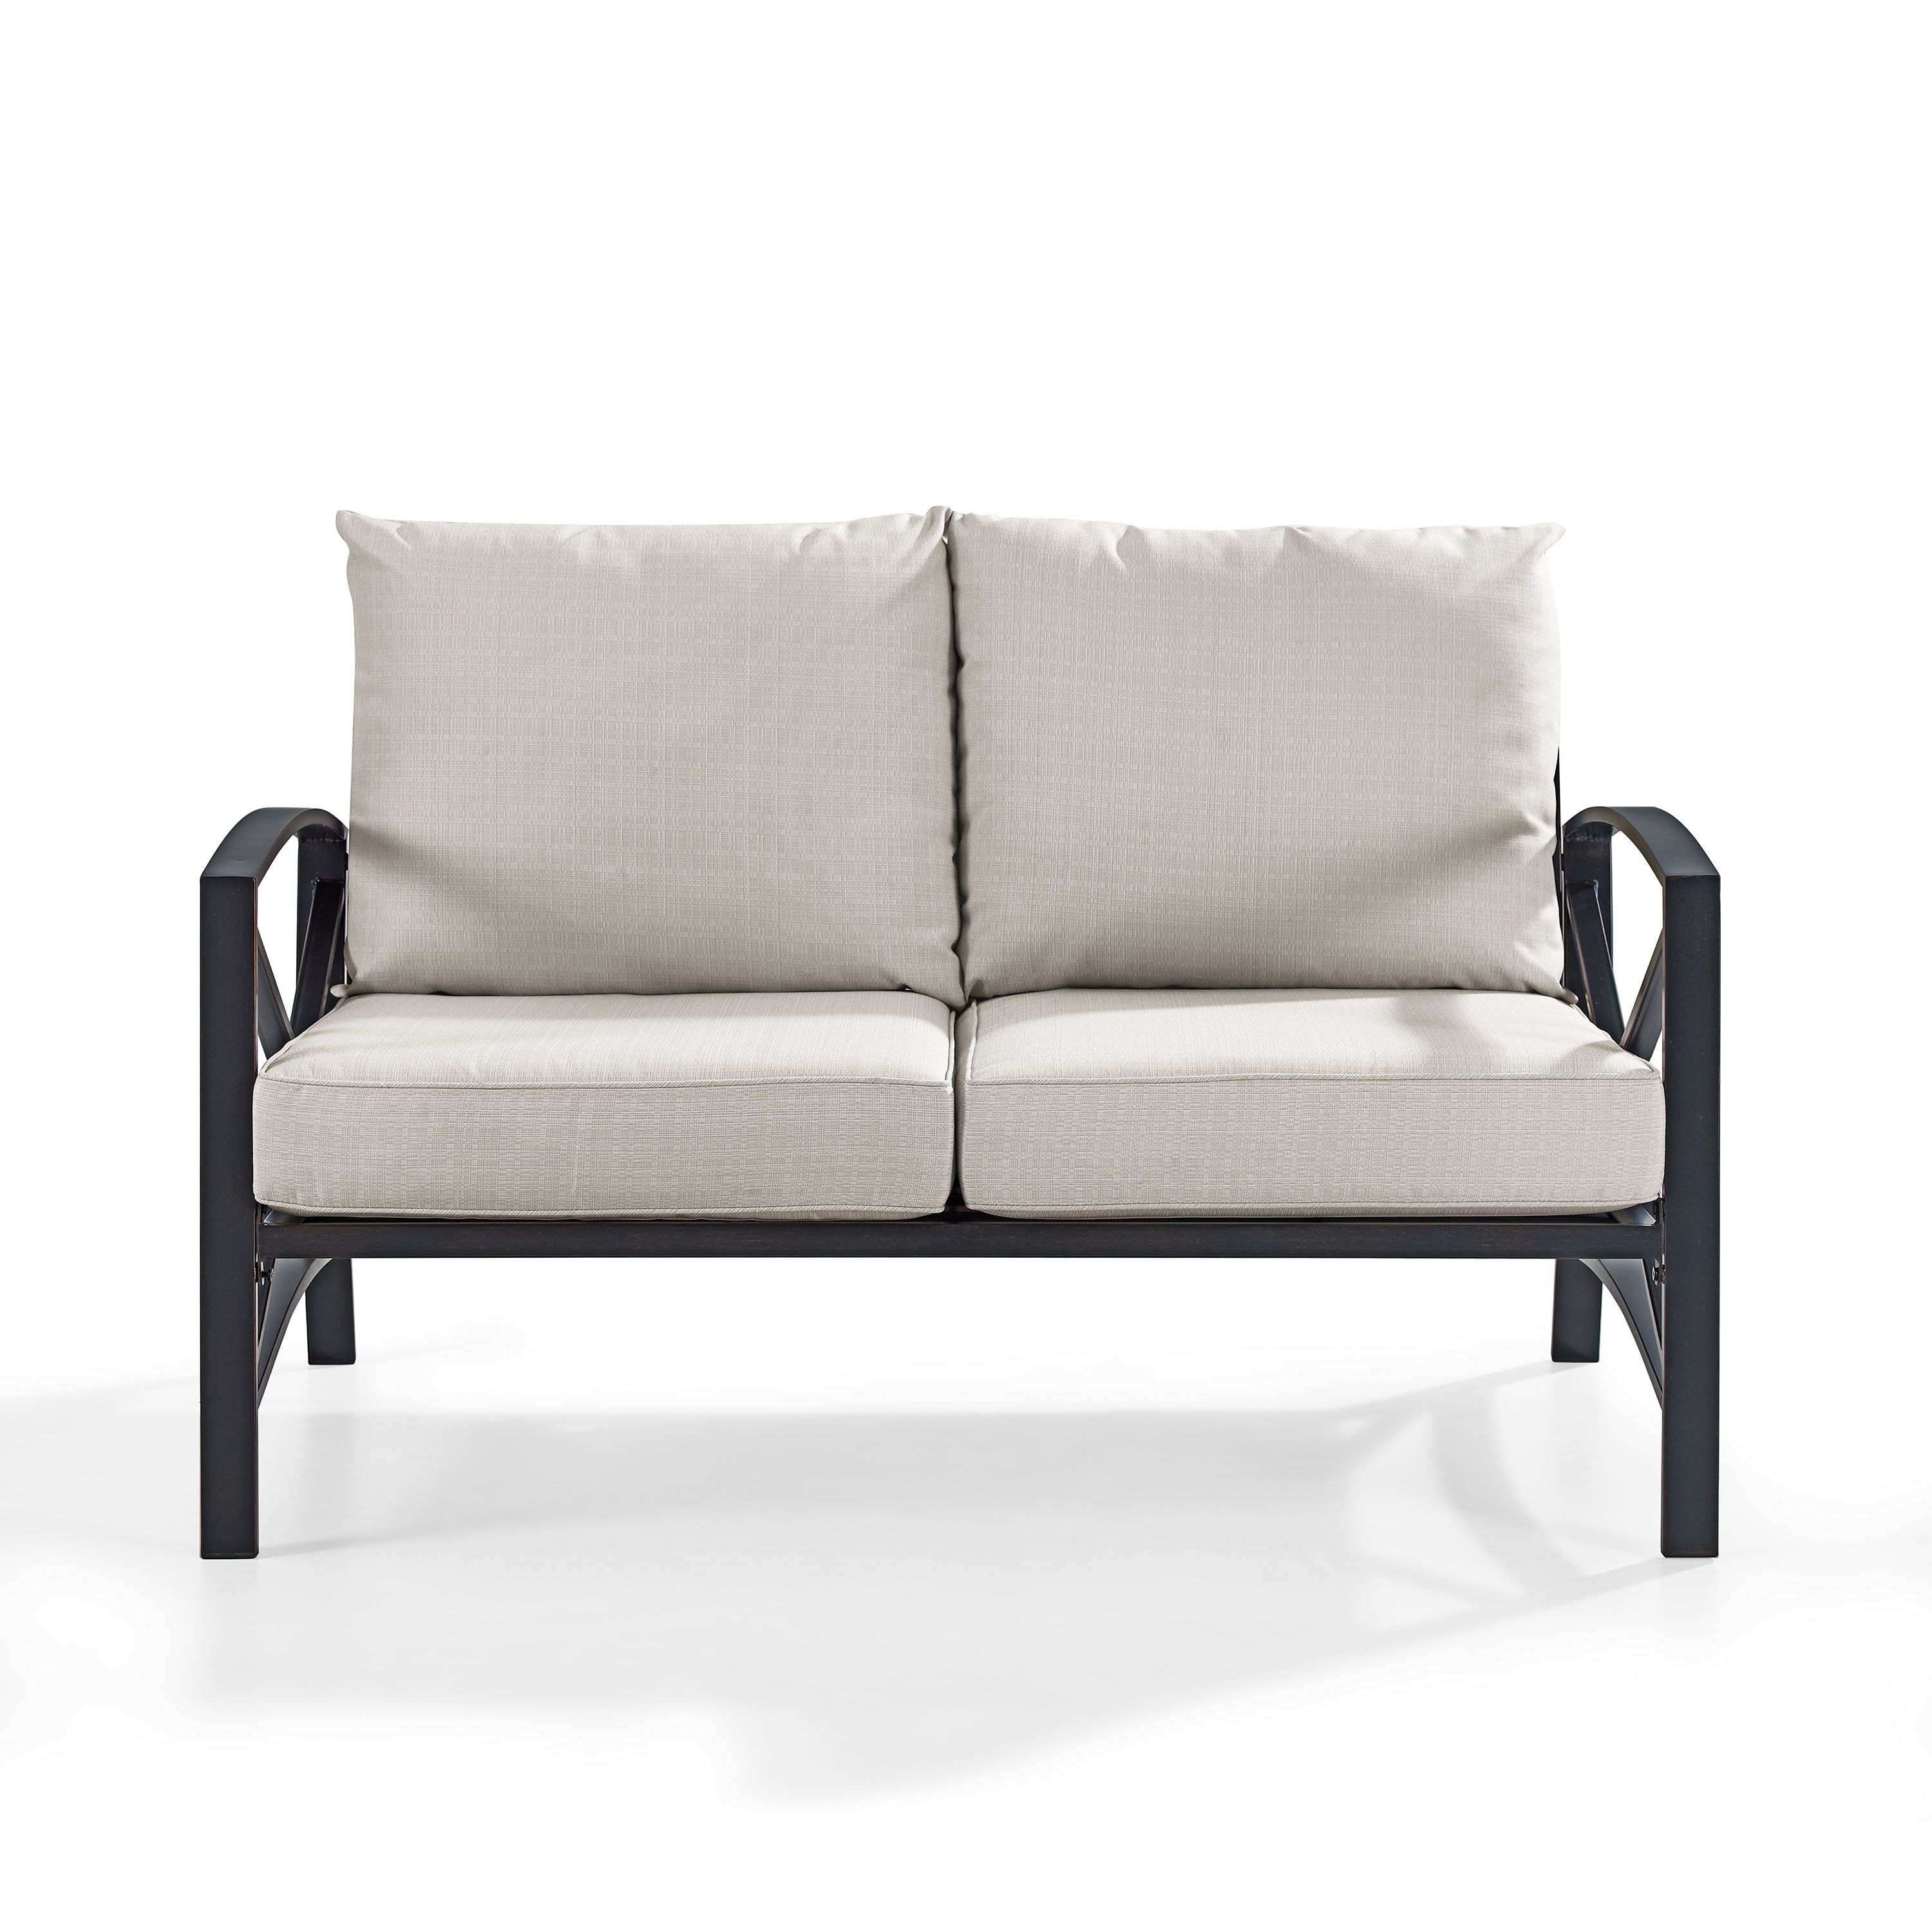 2019 Freitag Loveseat With Cushions For Nadine Loveseats With Cushions (View 9 of 20)